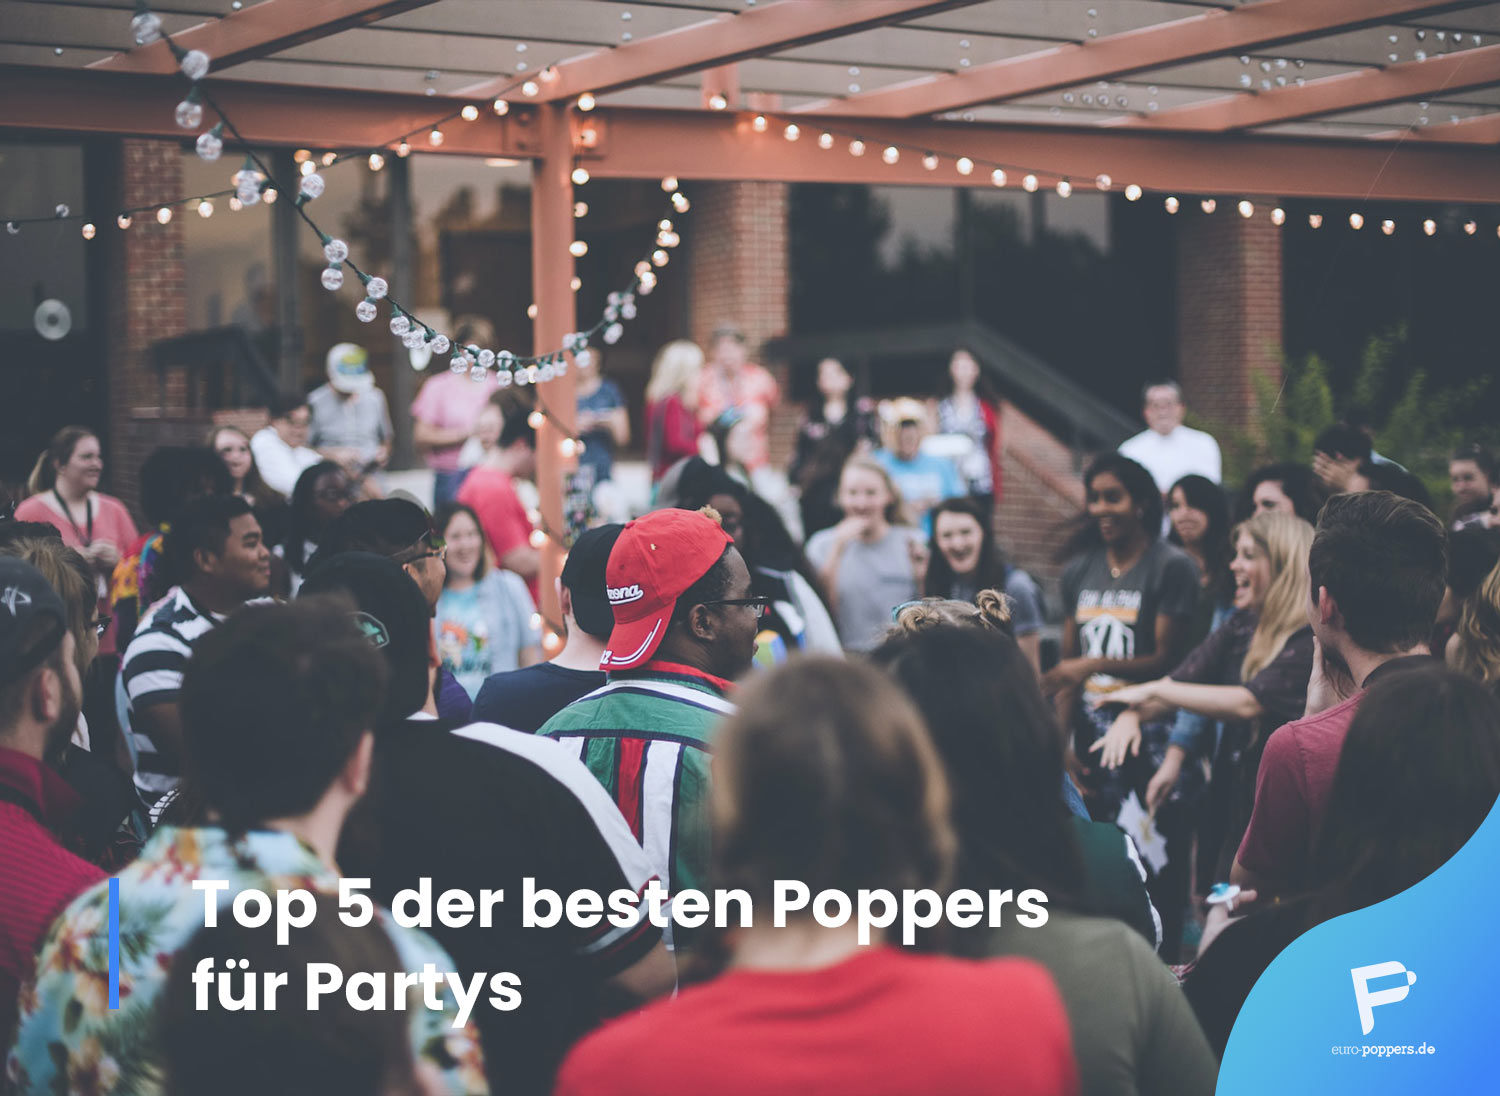 You are currently viewing Top 5 der besten Poppers für Partys